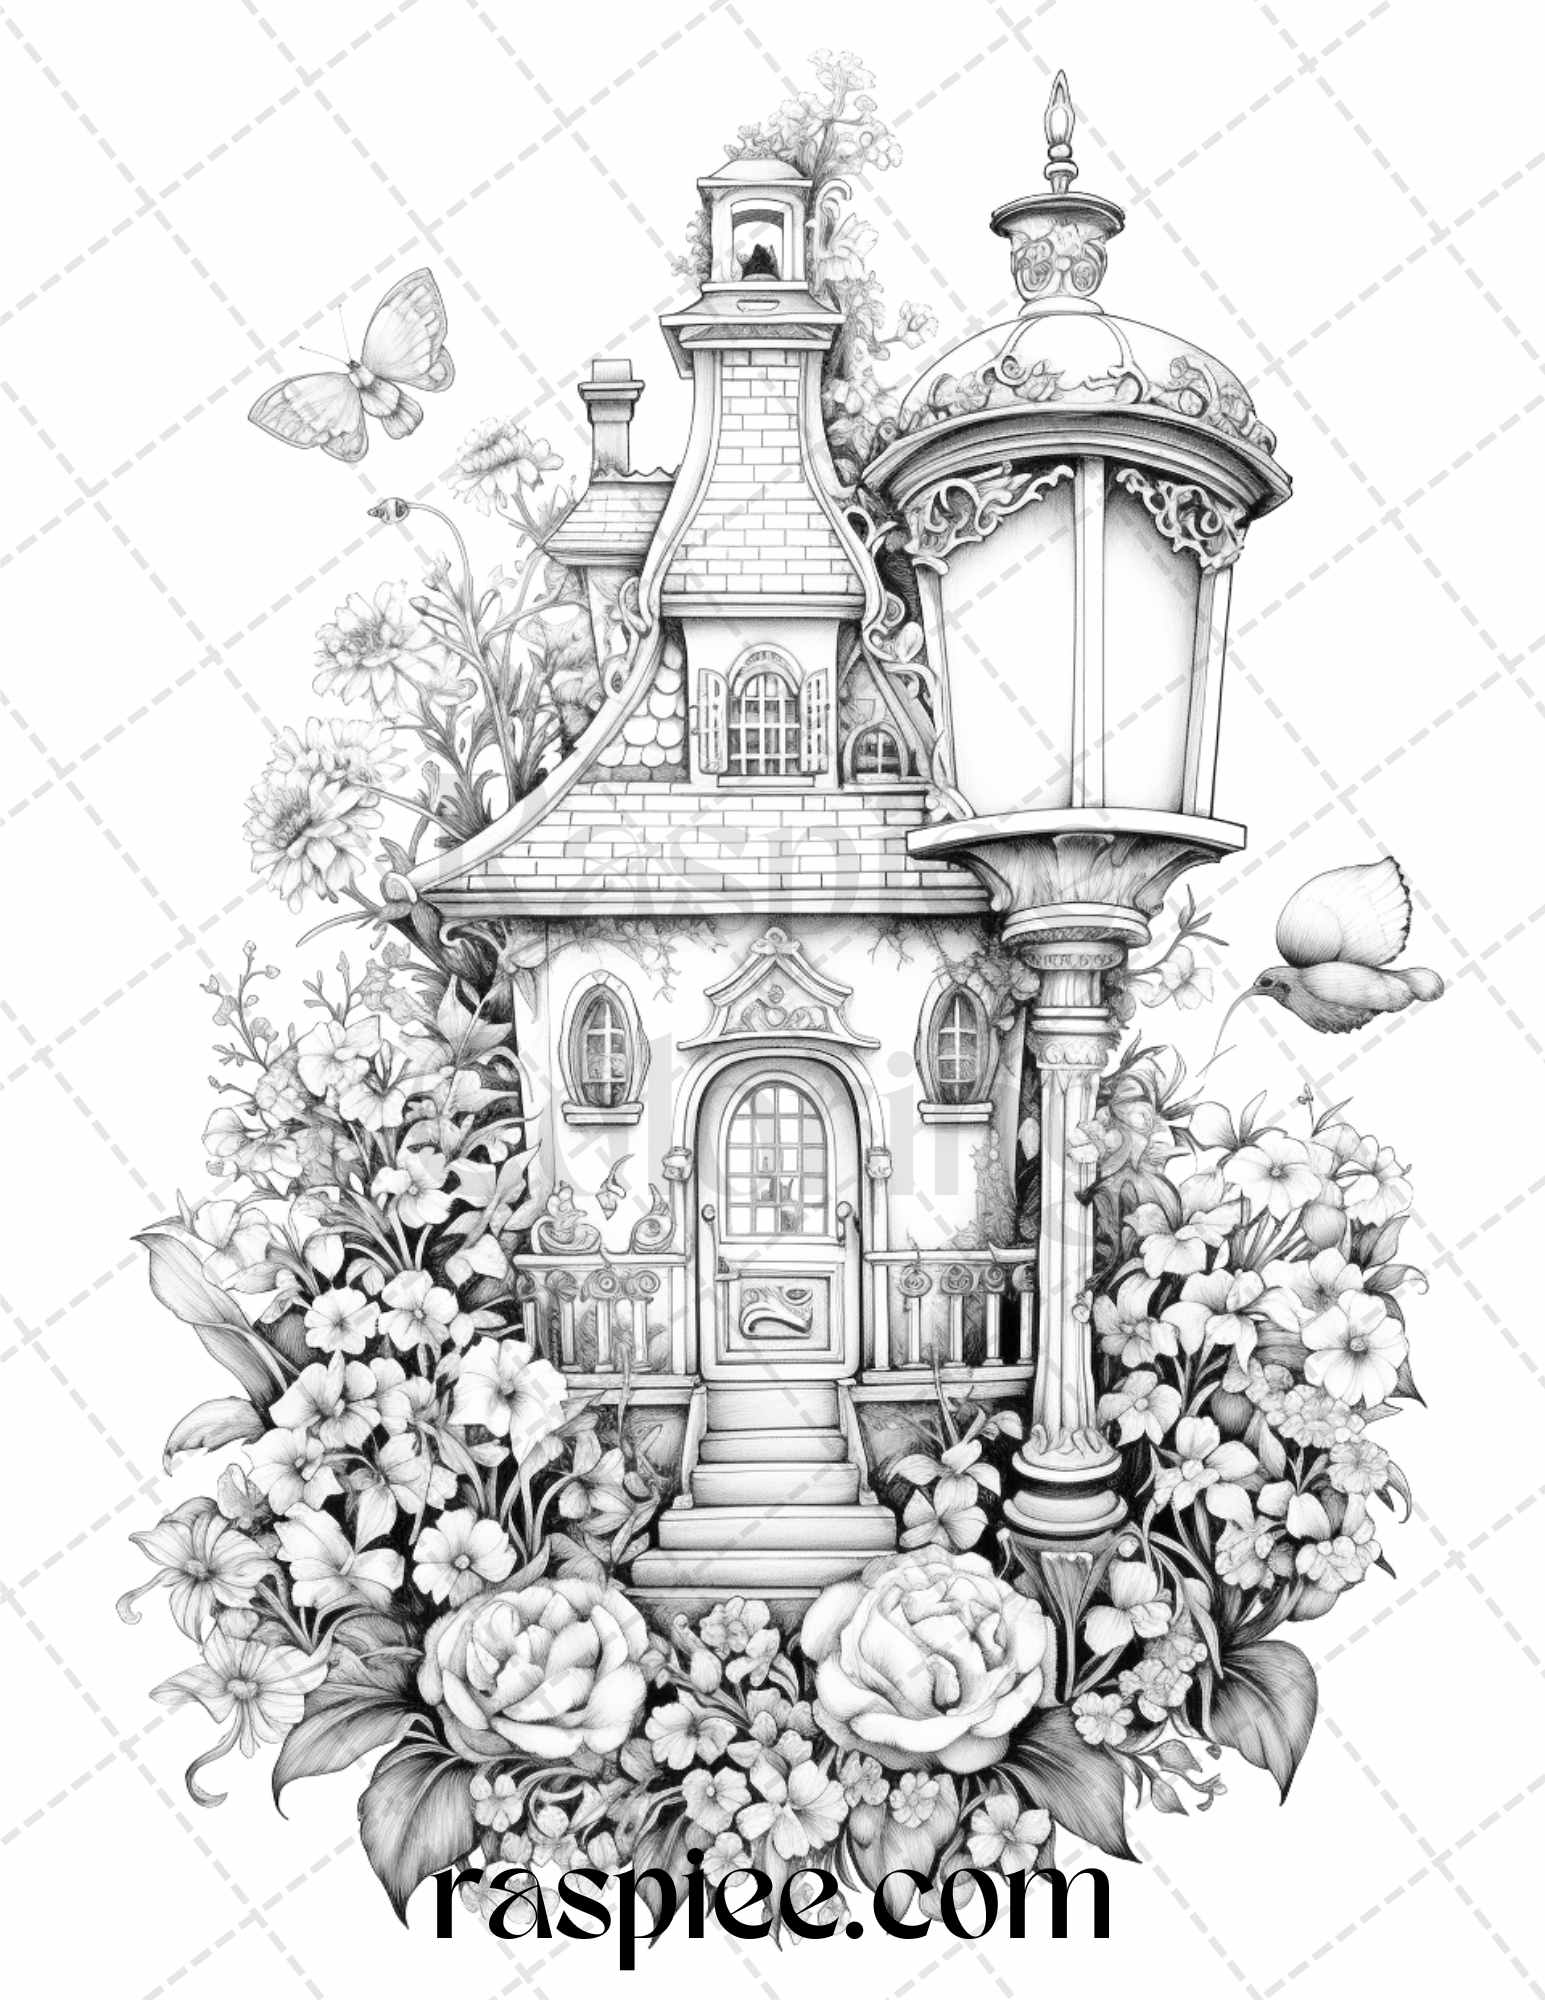 50 Lantern Fairy Houses Grayscale Coloring Pages Printable for Adults, PDF File Instant Download - raspiee